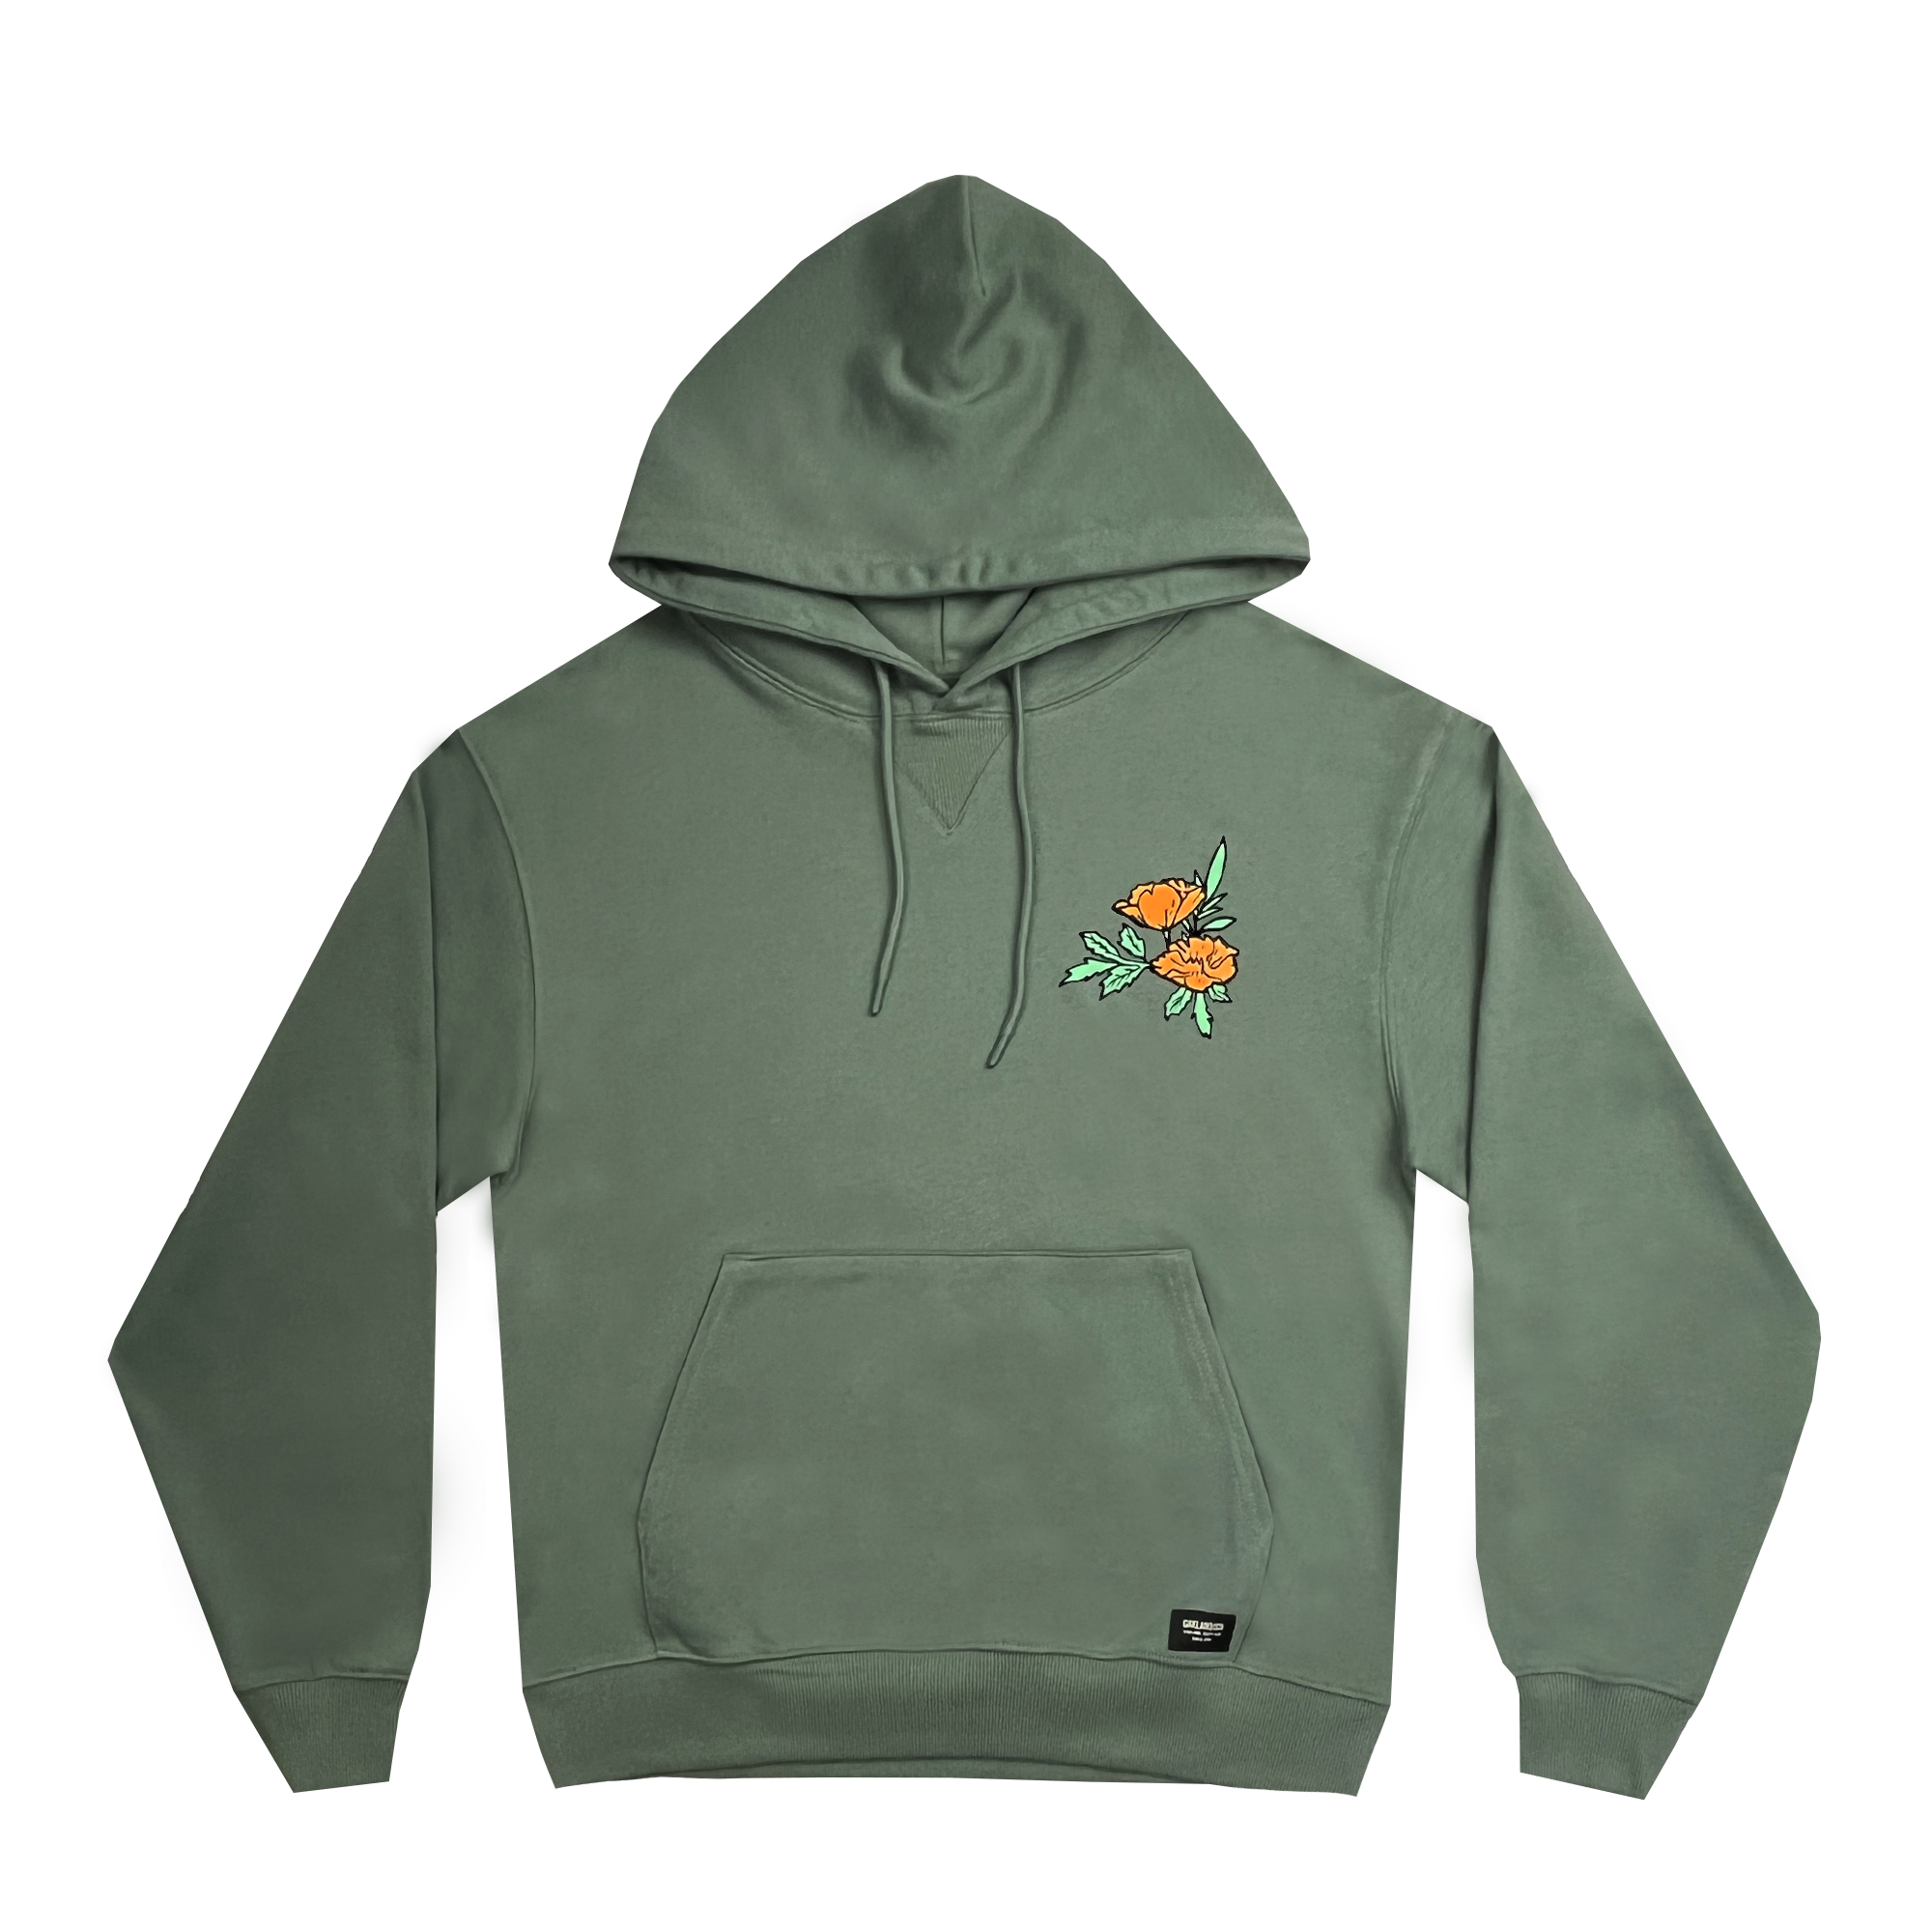 Front view of premium green hoodie with Oakland Dream design .